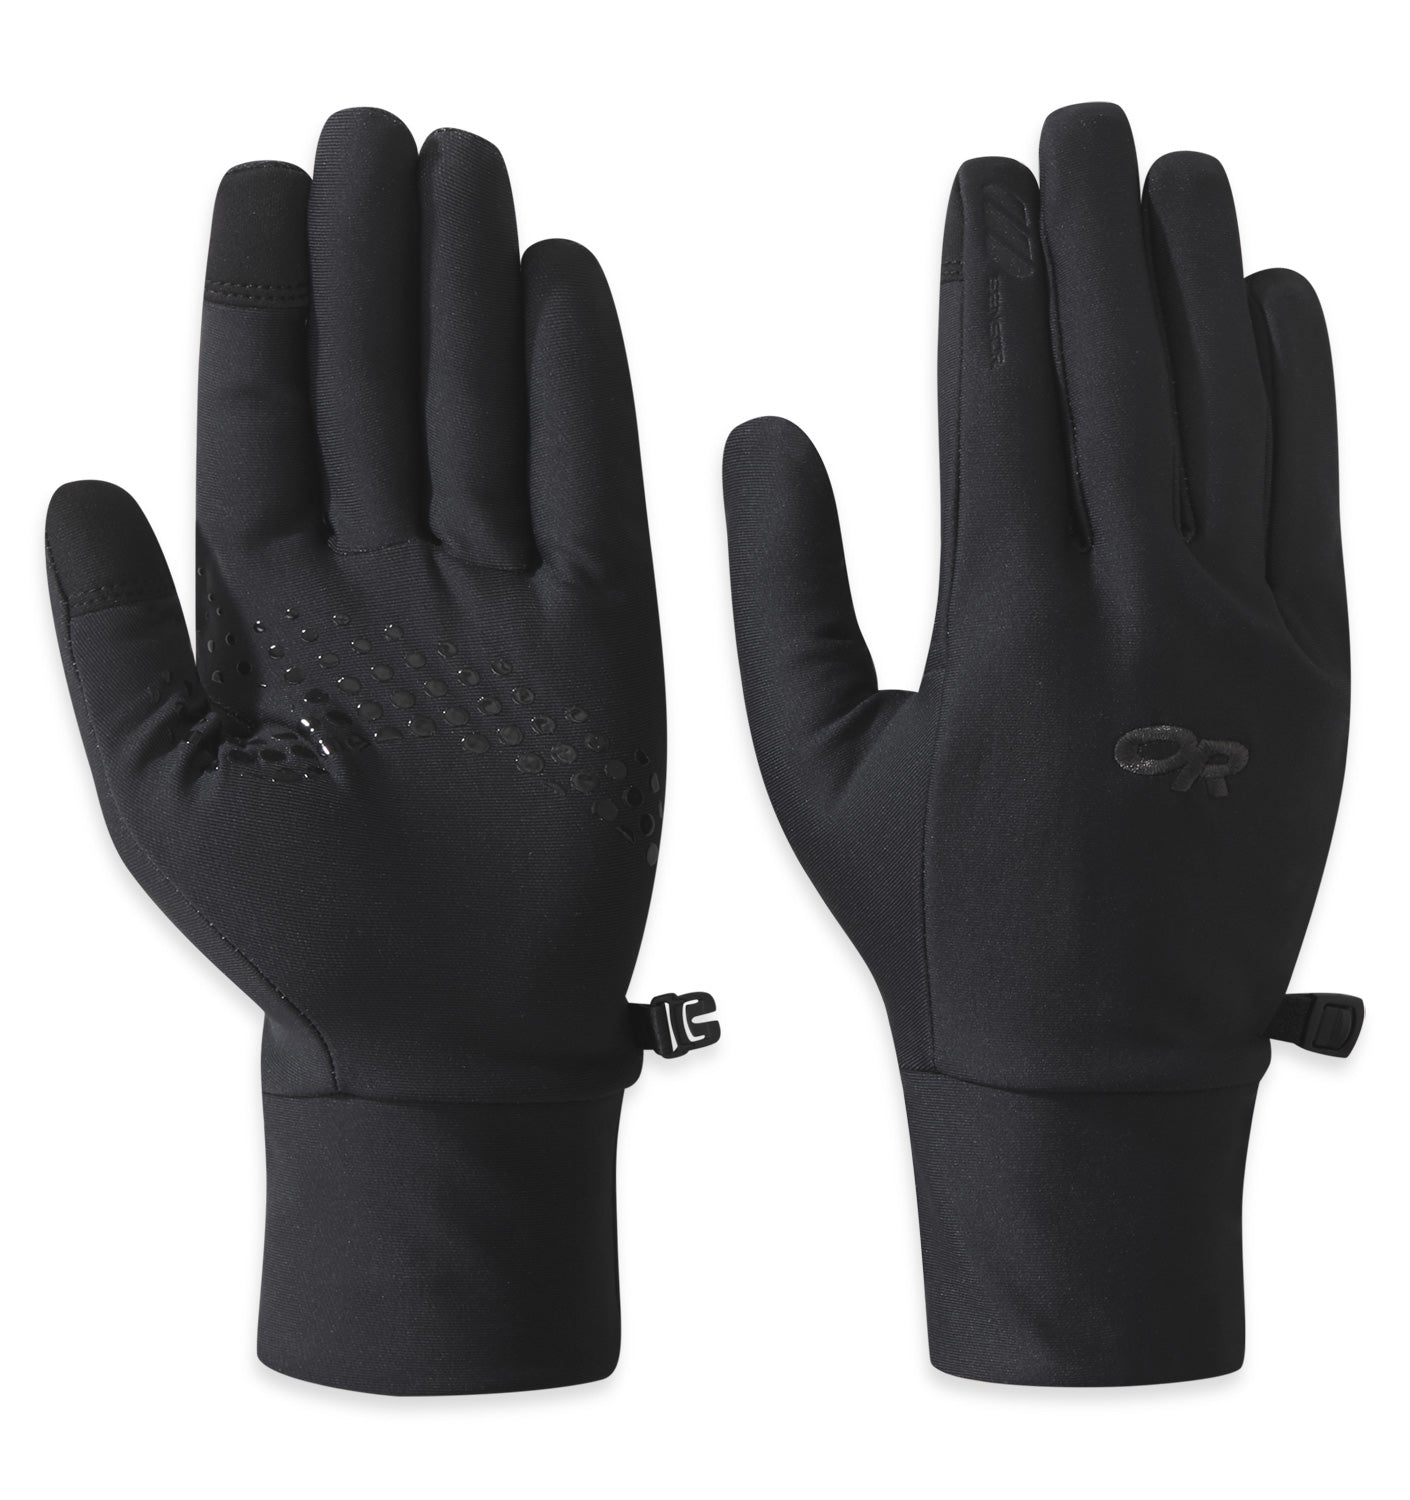 outdoor research vigor lightweight sensor touchscreen gloves women's front and back view in color black